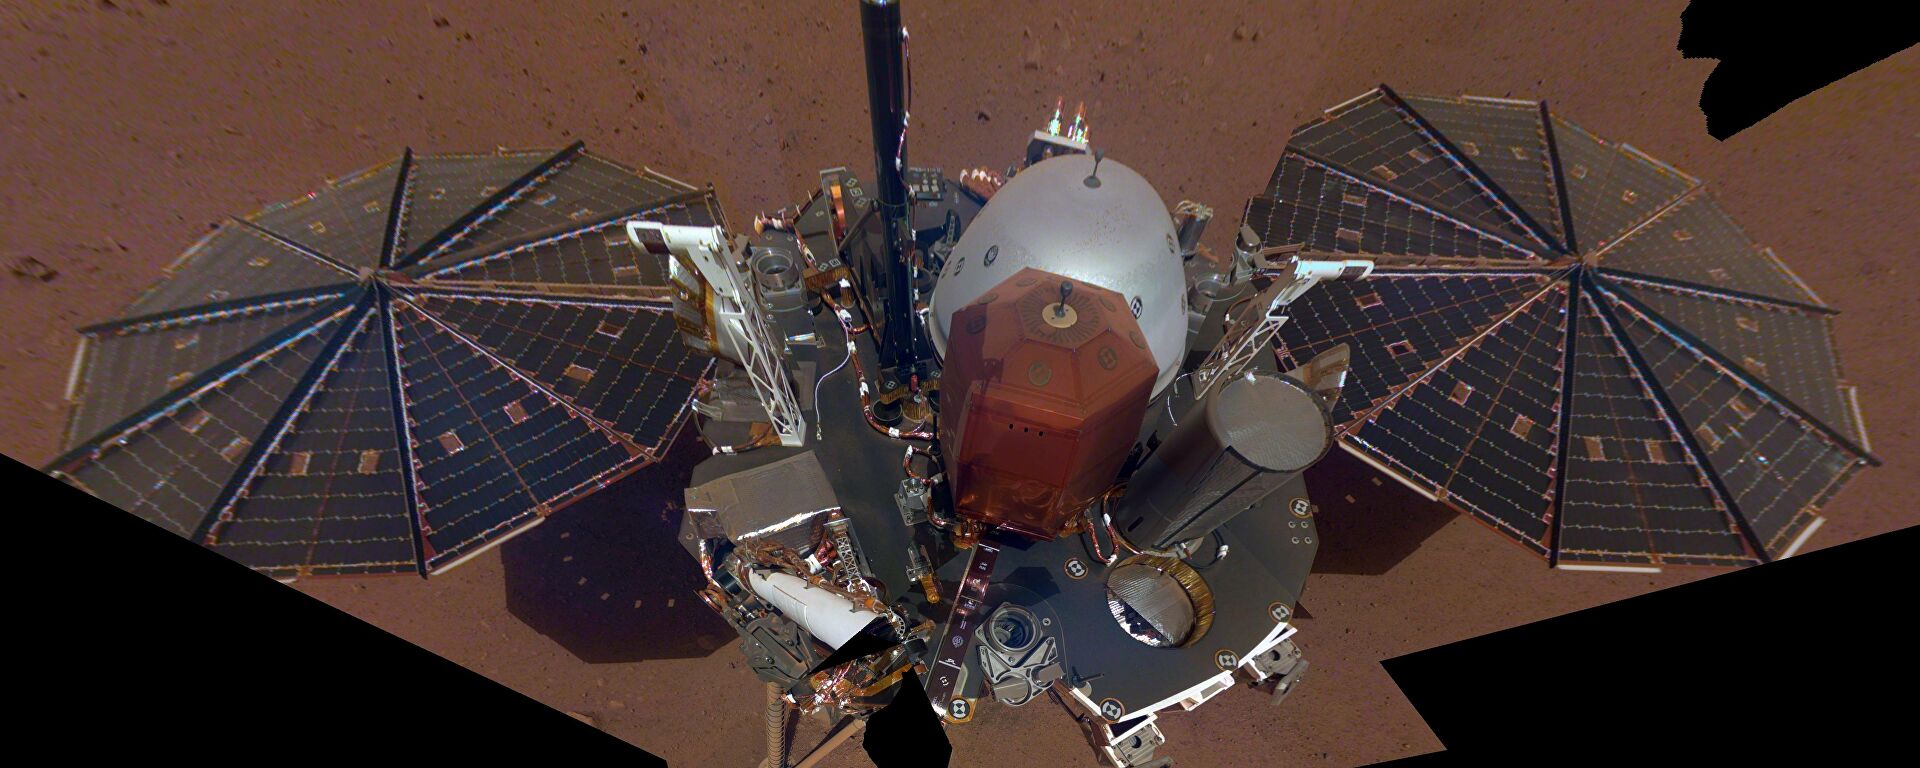 The Mars probe InSight takes a selfie with a camera attached to the robotic arm - Sputnik Brasil, 1920, 09.23.2021